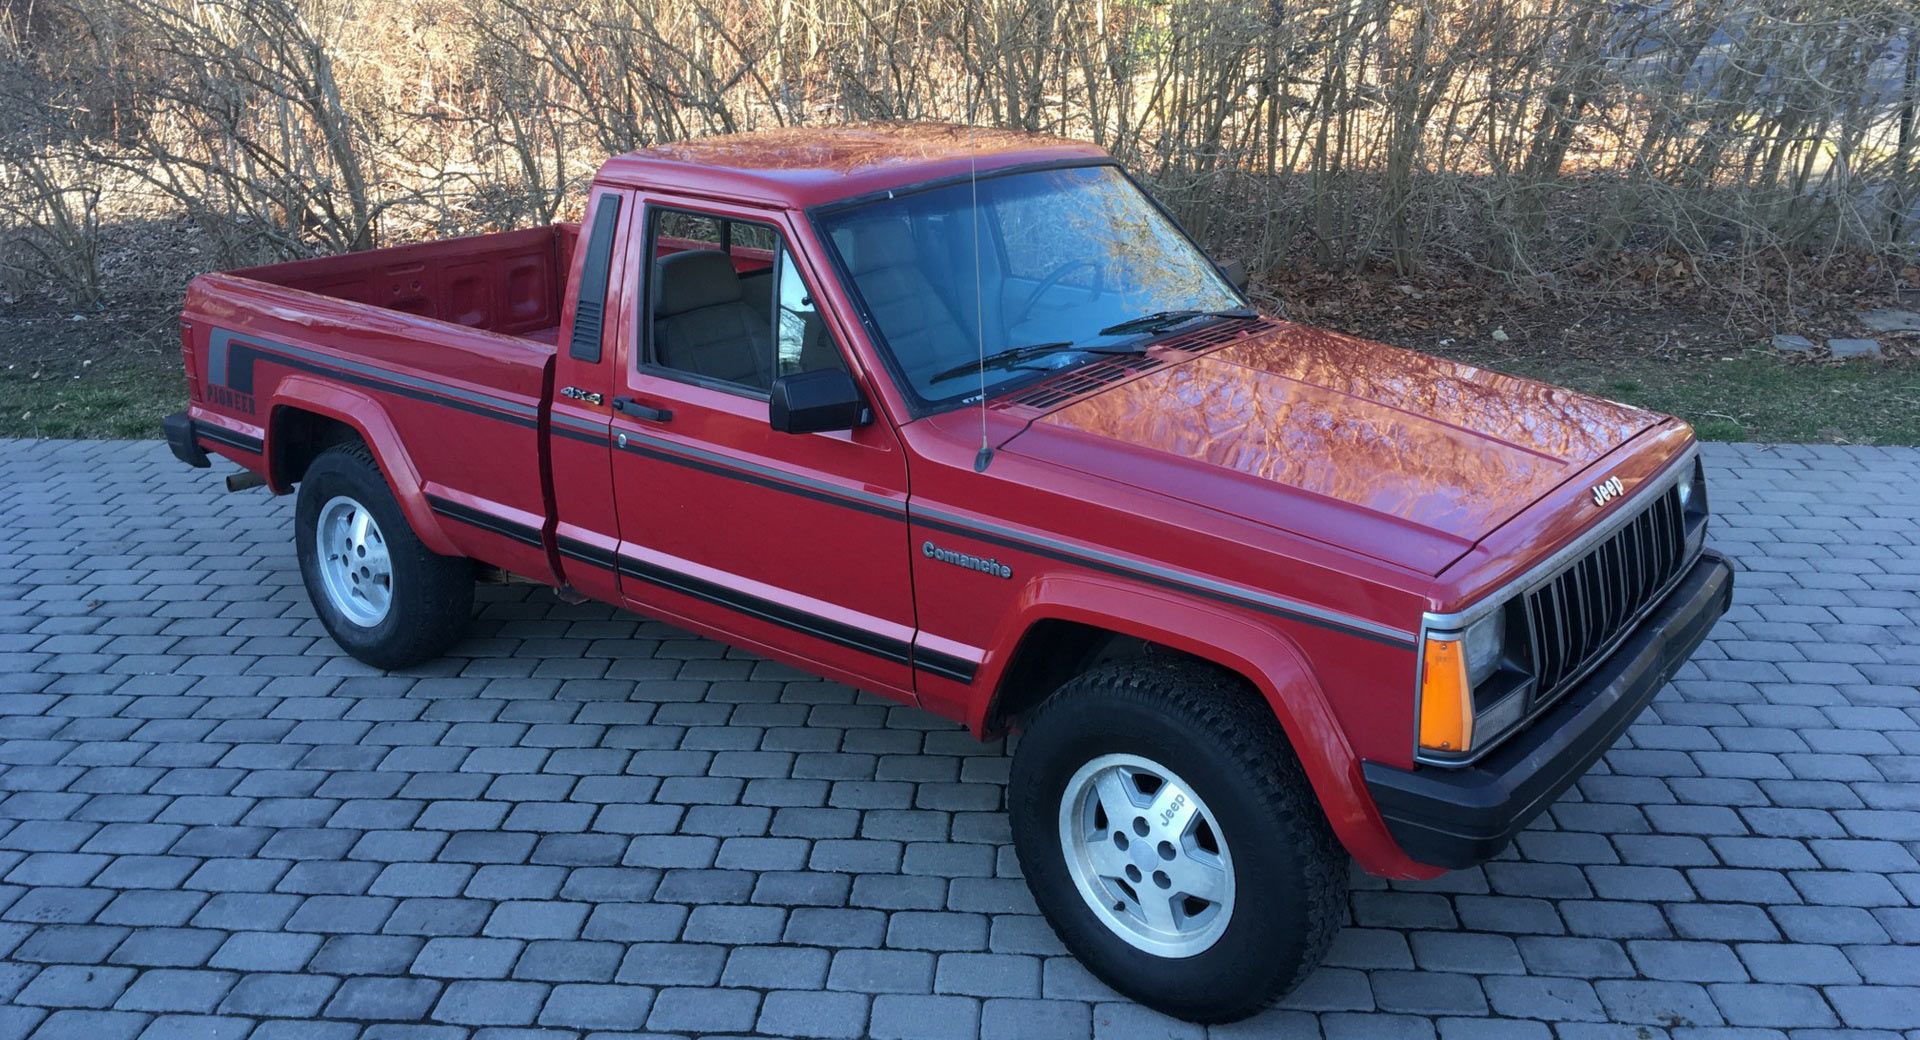 Red Jeep Comanche in tile driveway